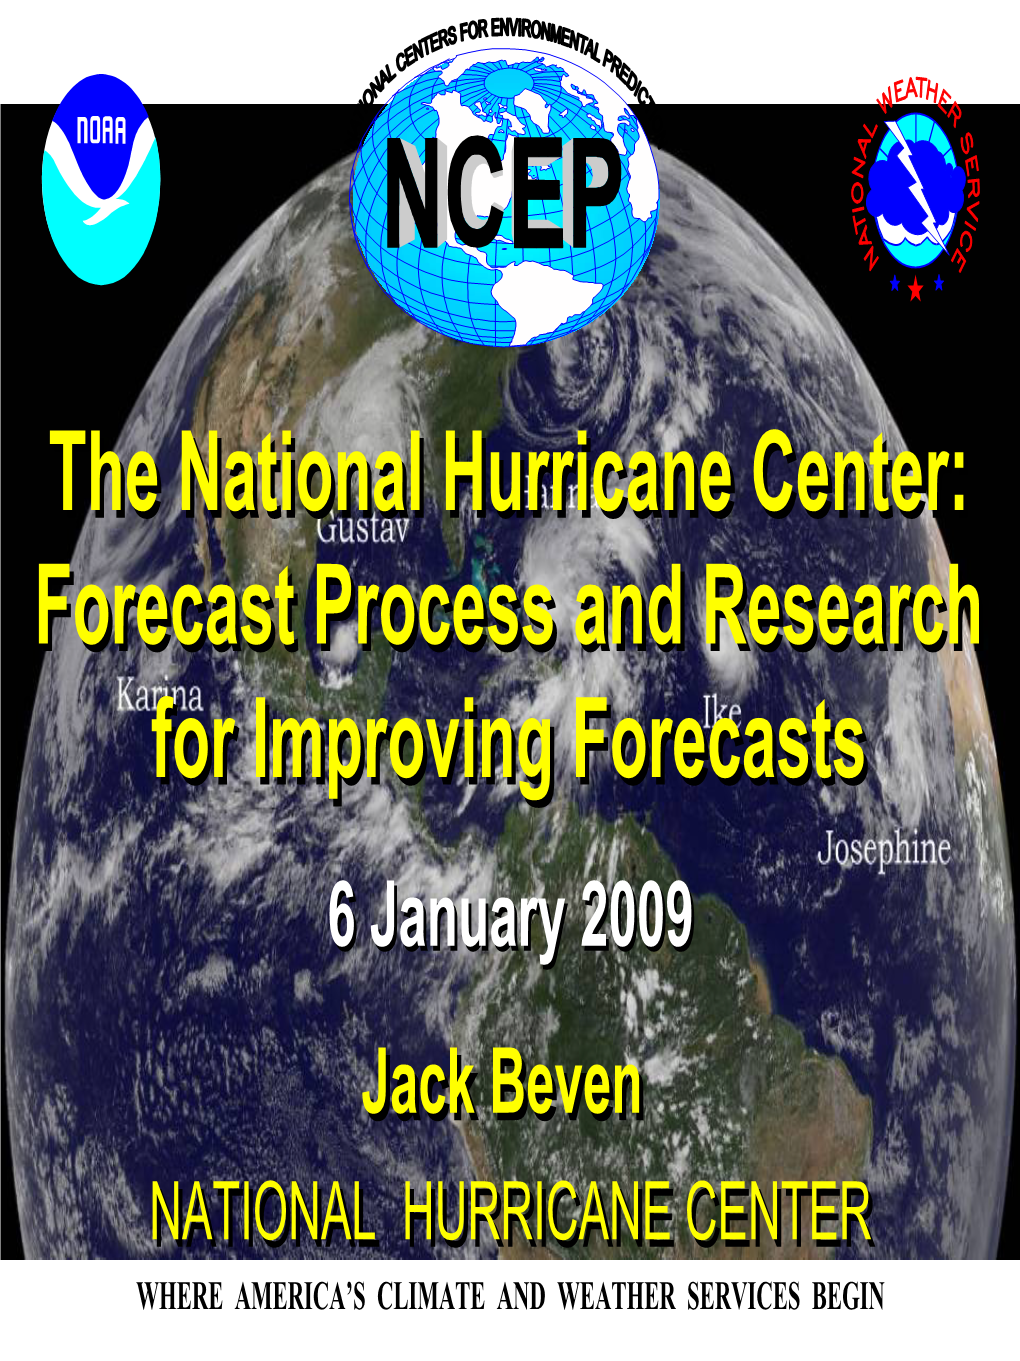 The National Hurricane Center: Forecast Process and Research For